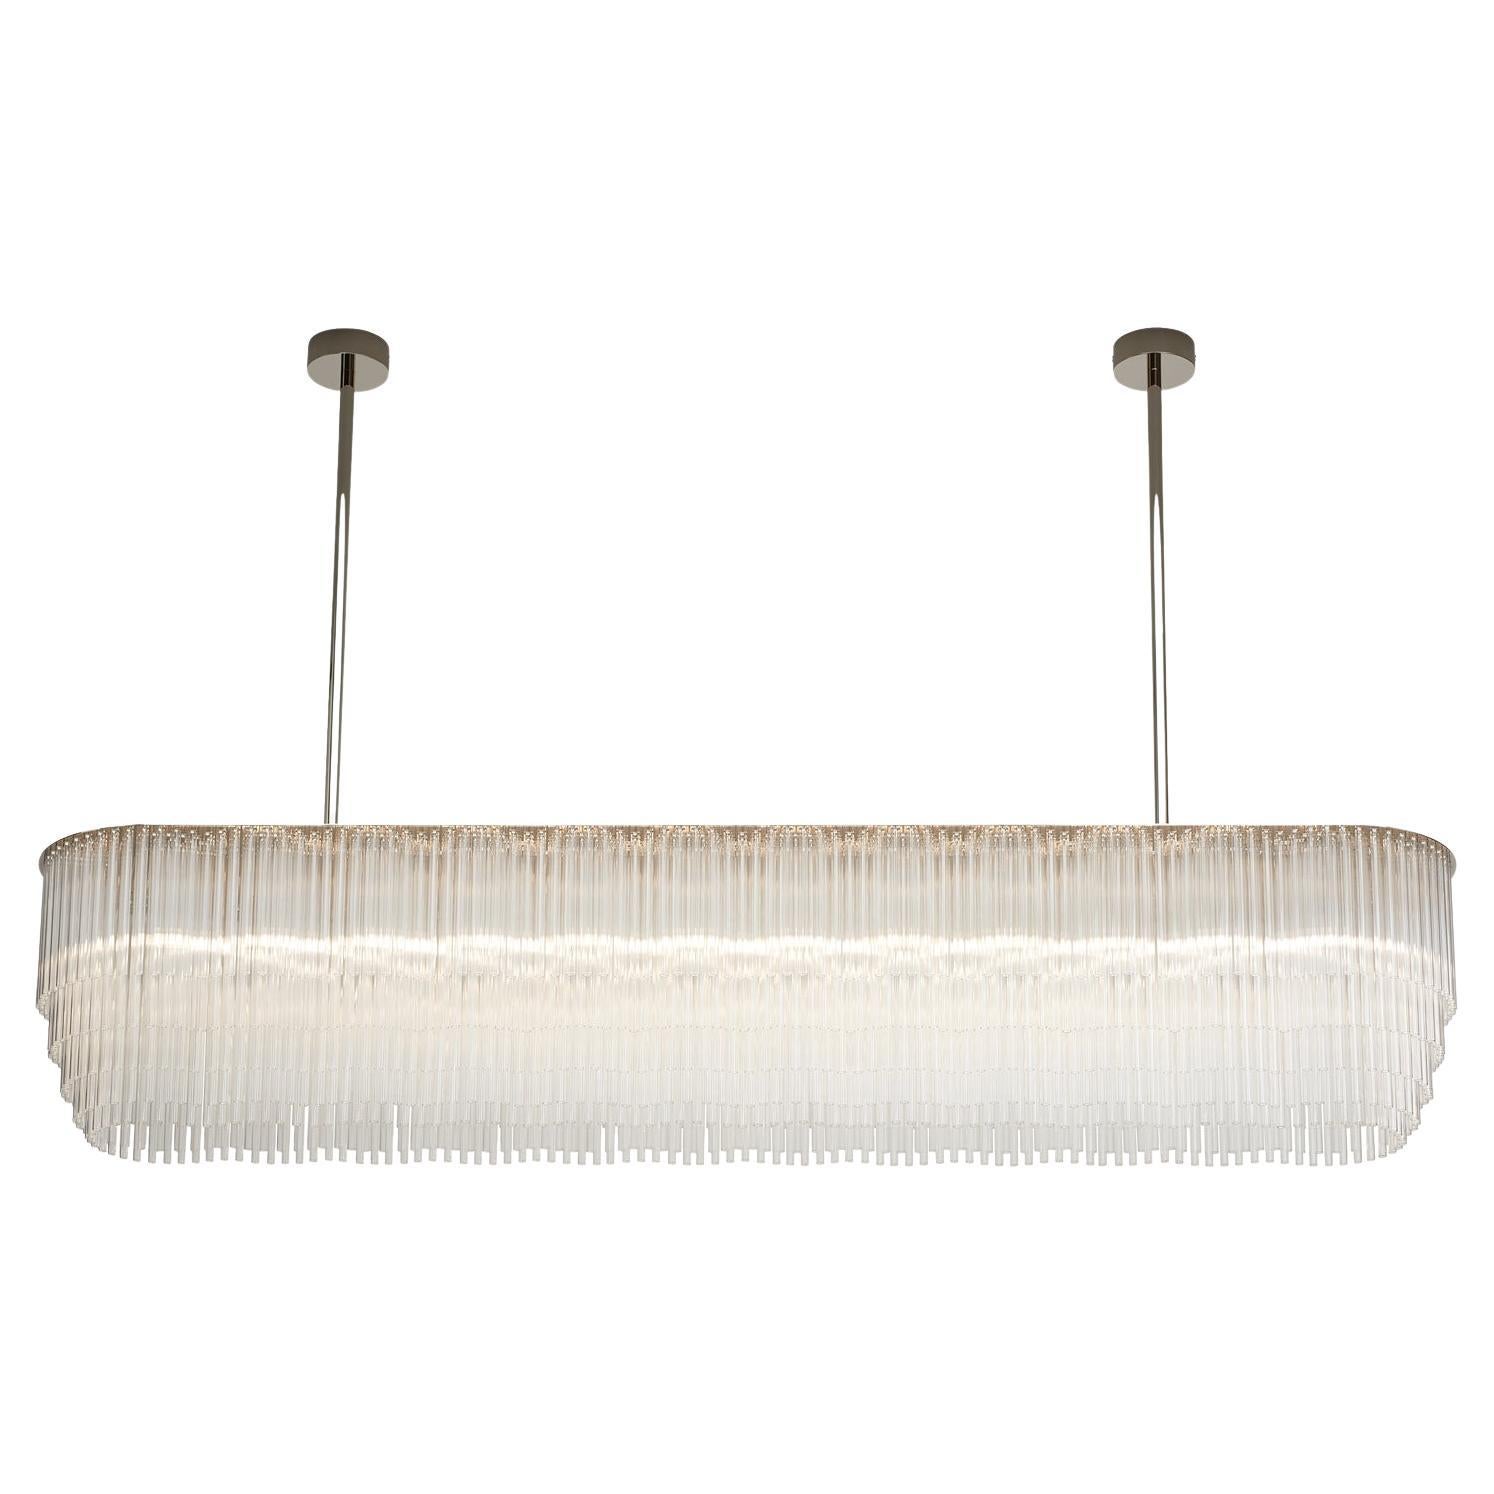 Linear Chandelier 1697mm / 66.75" in Polished Chrome with Tiered Glass Profile